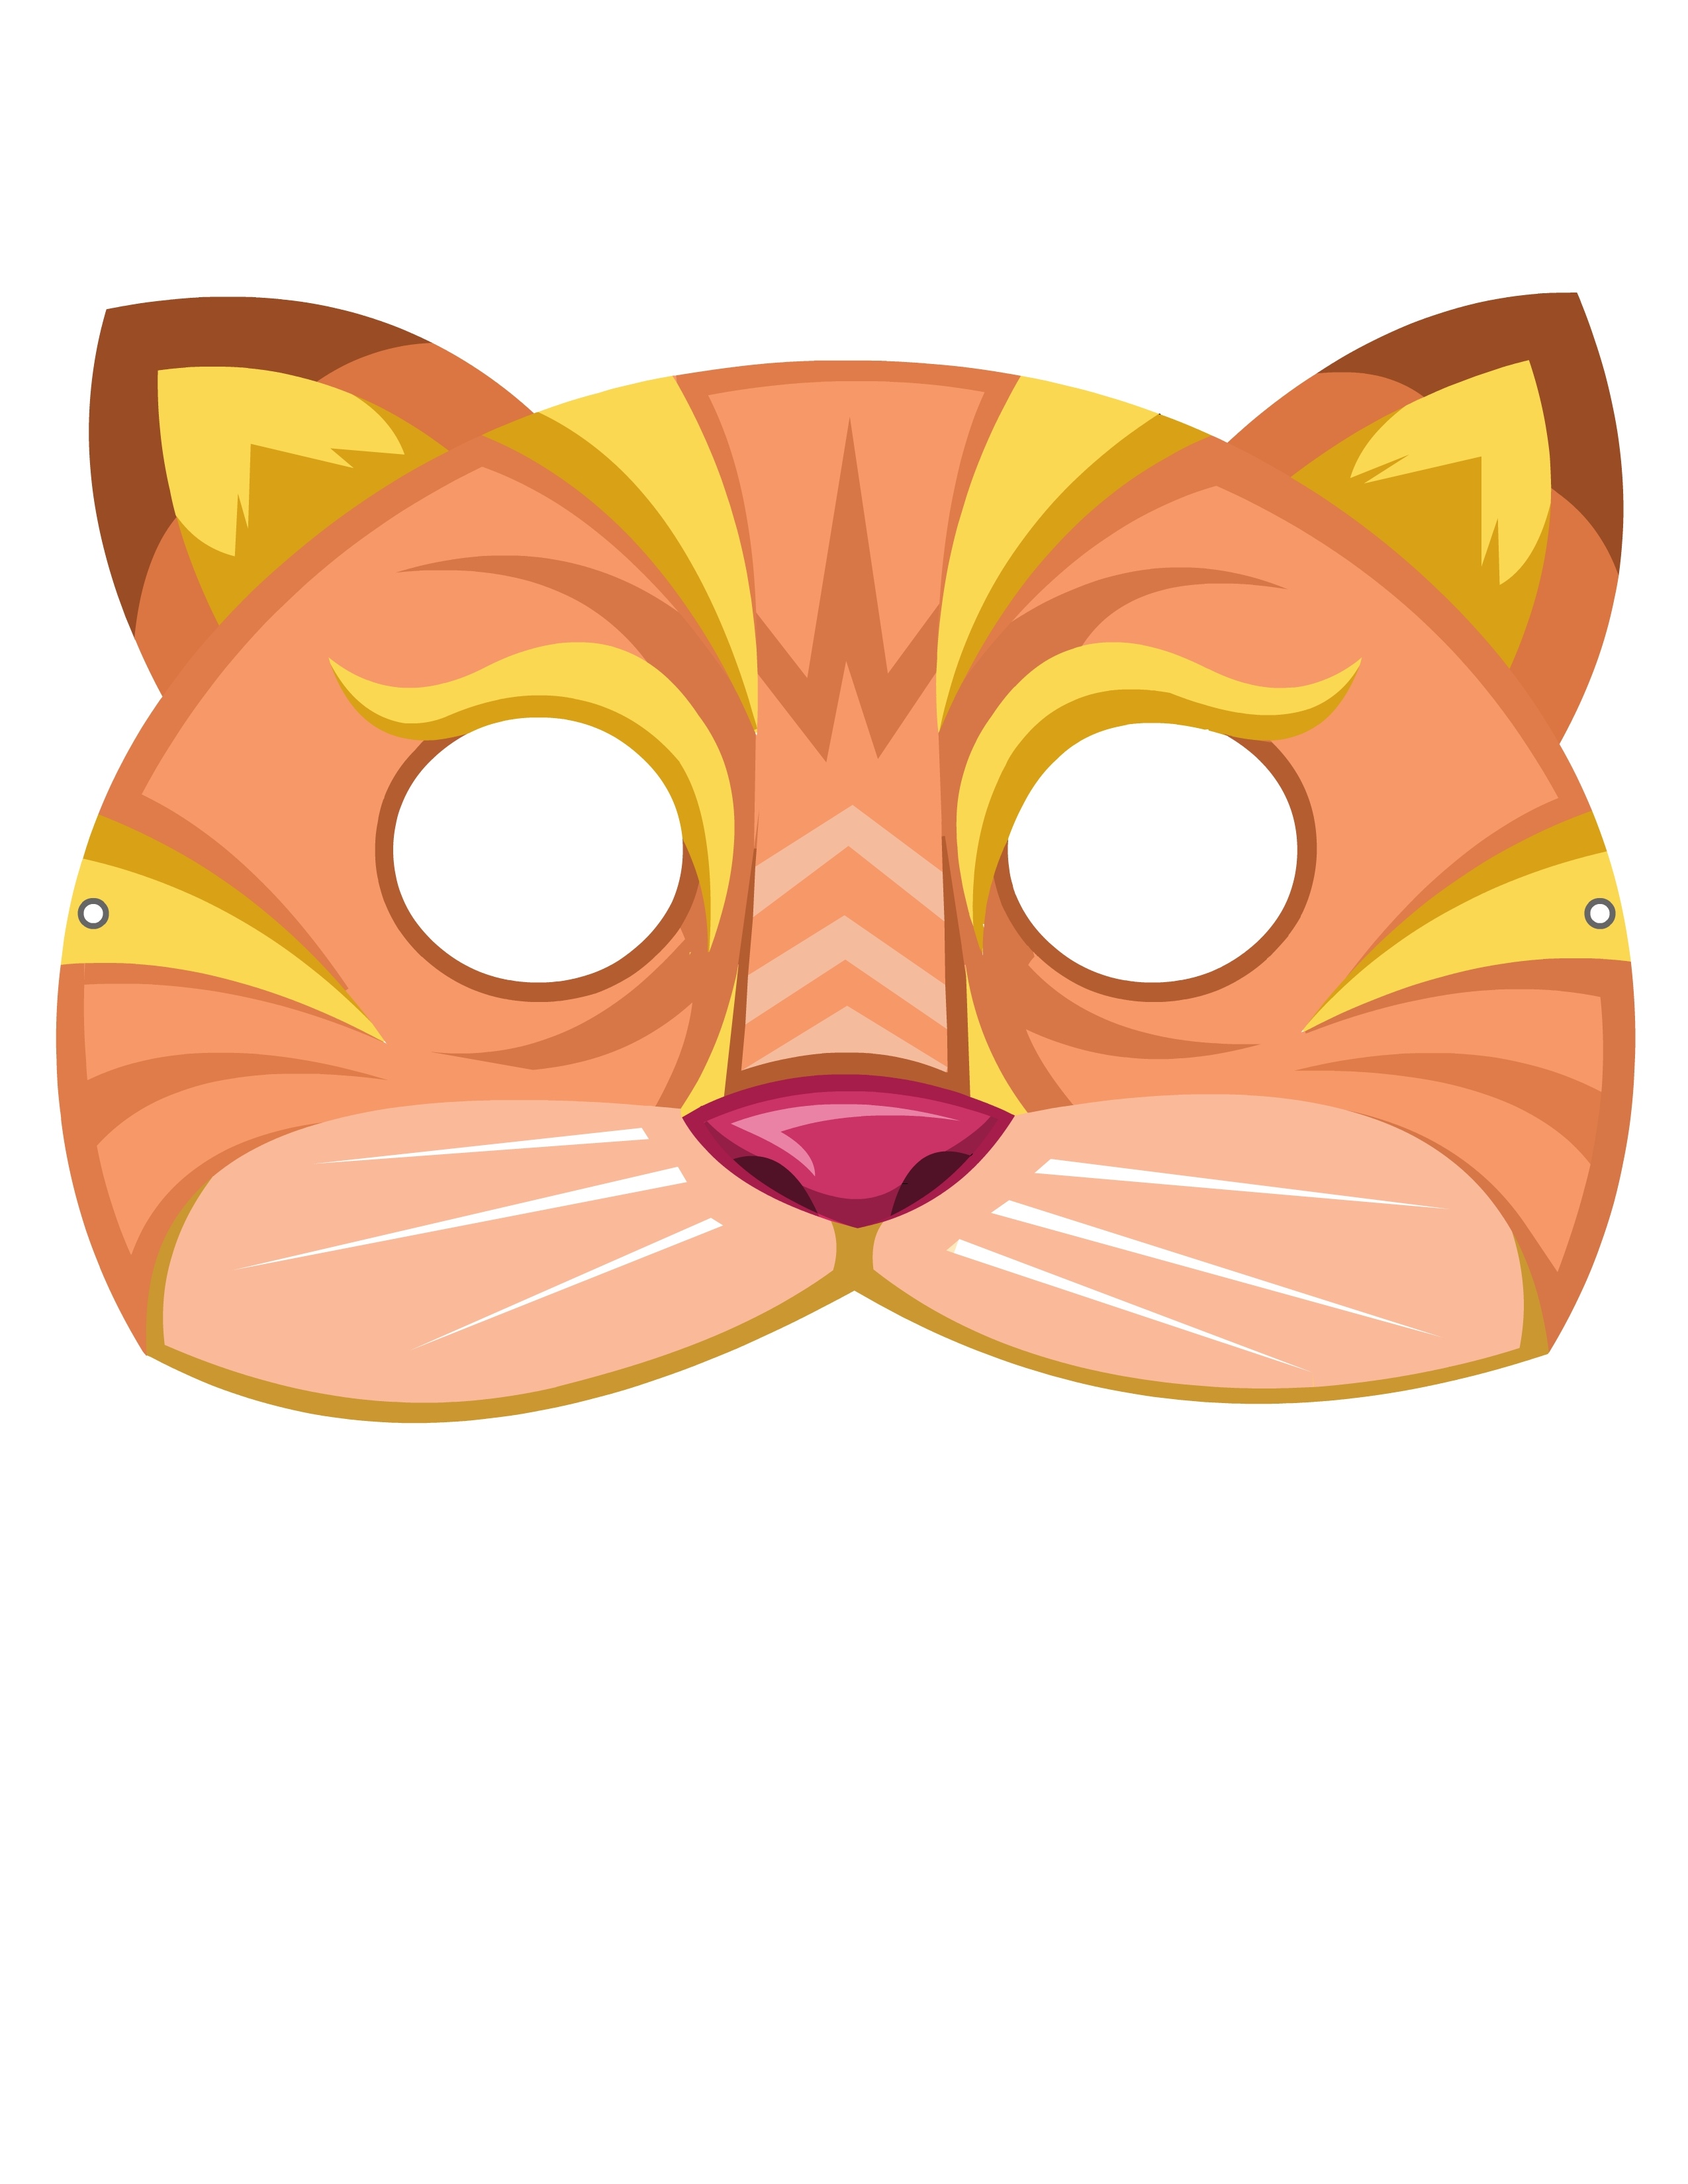 cat-mask-studyladder-interactive-learning-games